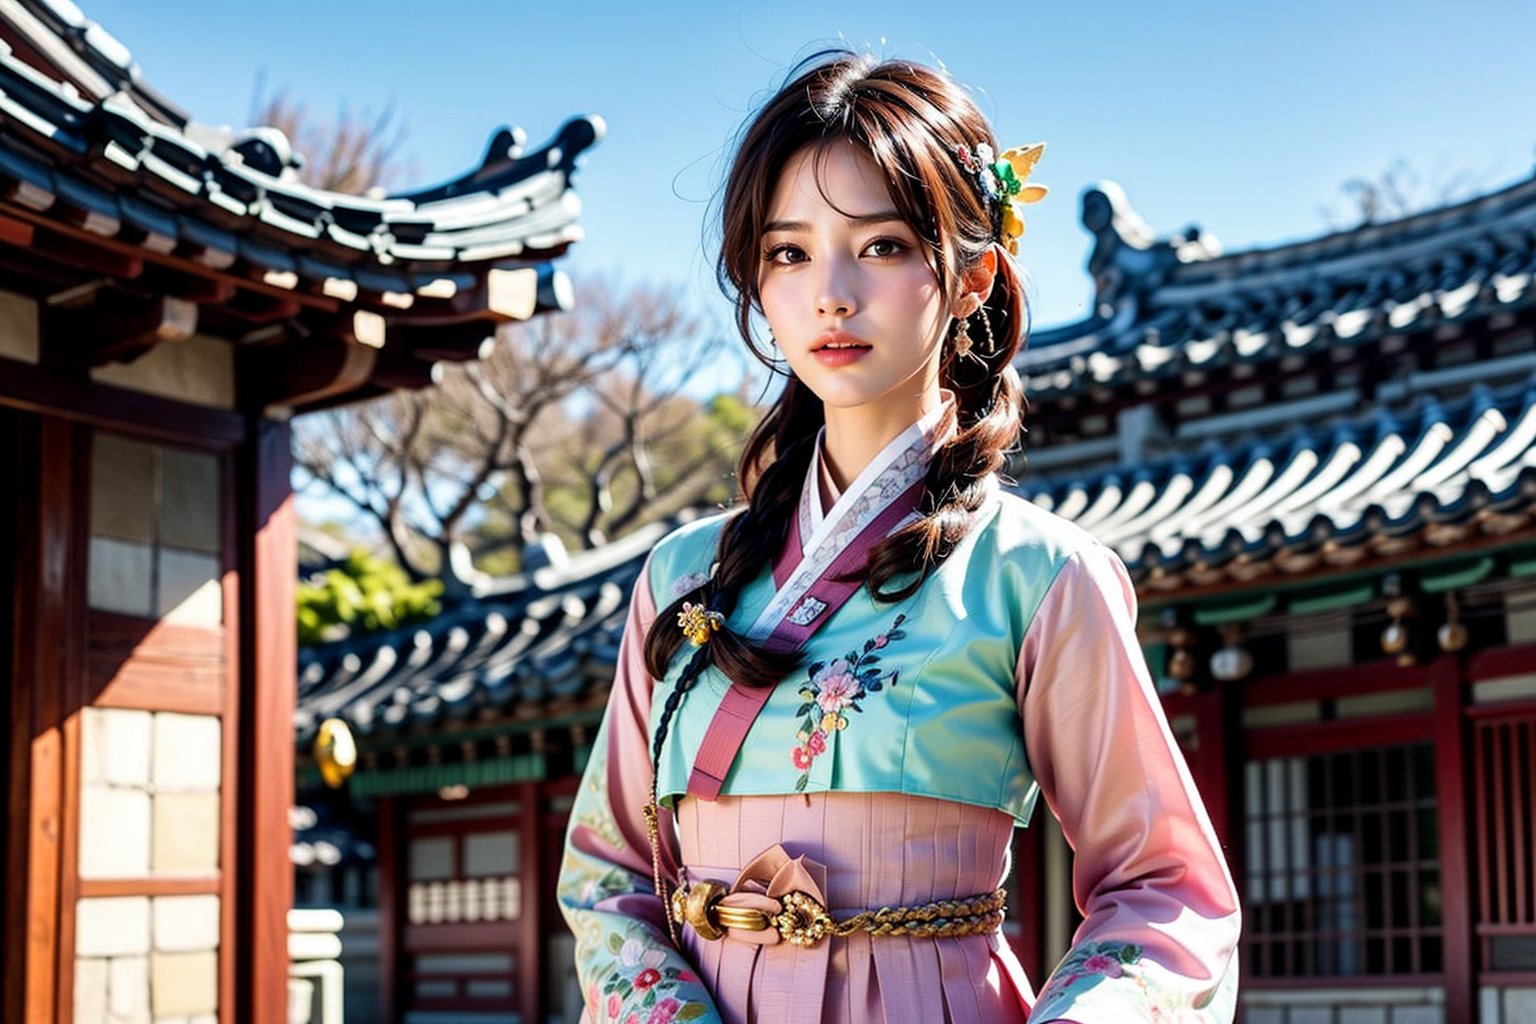 Shot at a wide angle, this photo shows a woman wearing traditional Korean clothing. The art style is vivid and realistic, capturing the rich textures and colors of the clothing. The focus is on the woman, (((smile))) who turns slightly towards the camera and smiles softly. ((Her hanbok consists of a delicately embroidered light green top and a pink skirt)). Combing (((Korean traditional hairstyle and hair accessories))). Outdoors, the background showcases detailed traditional Korean architecture. ancient city. The overall composition emphasizes cultural heritage and elegance.